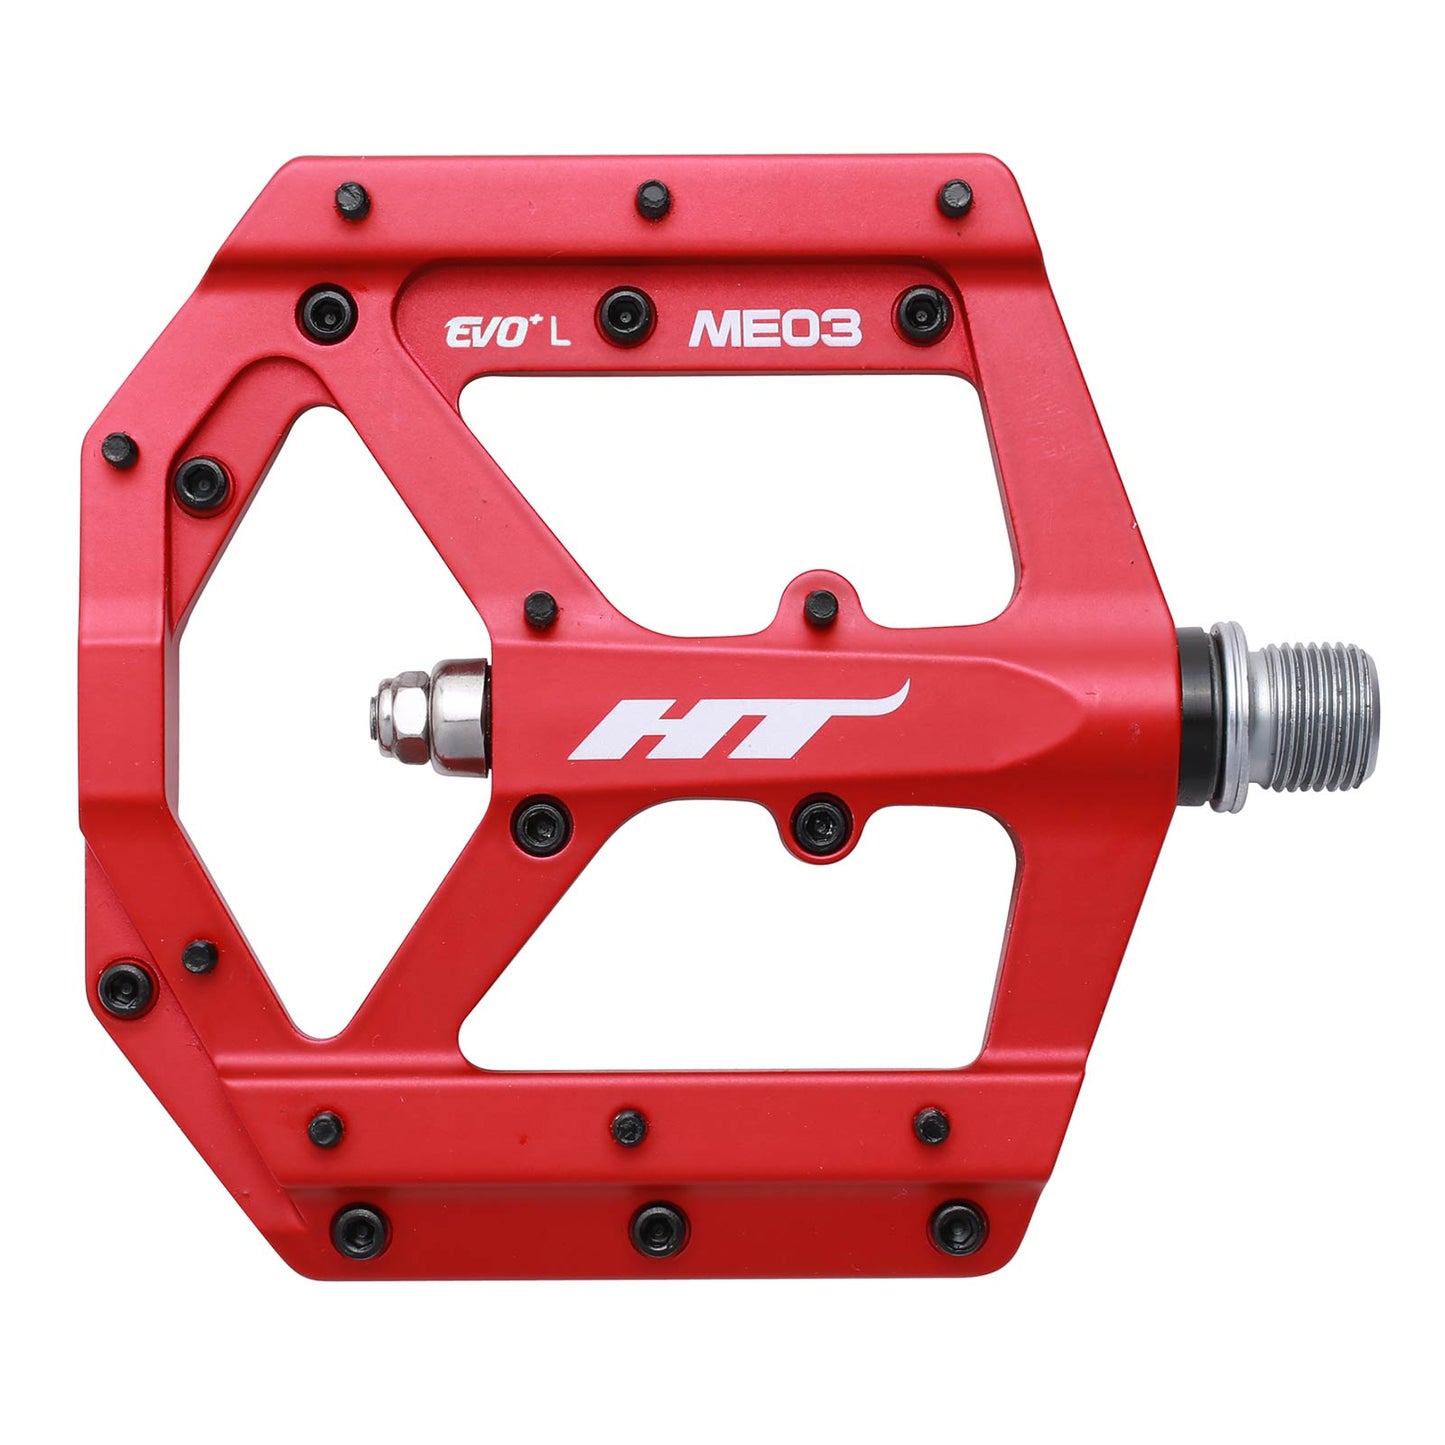 Ht ME03 Pedals Mag / CNC CRMO - Matte Red